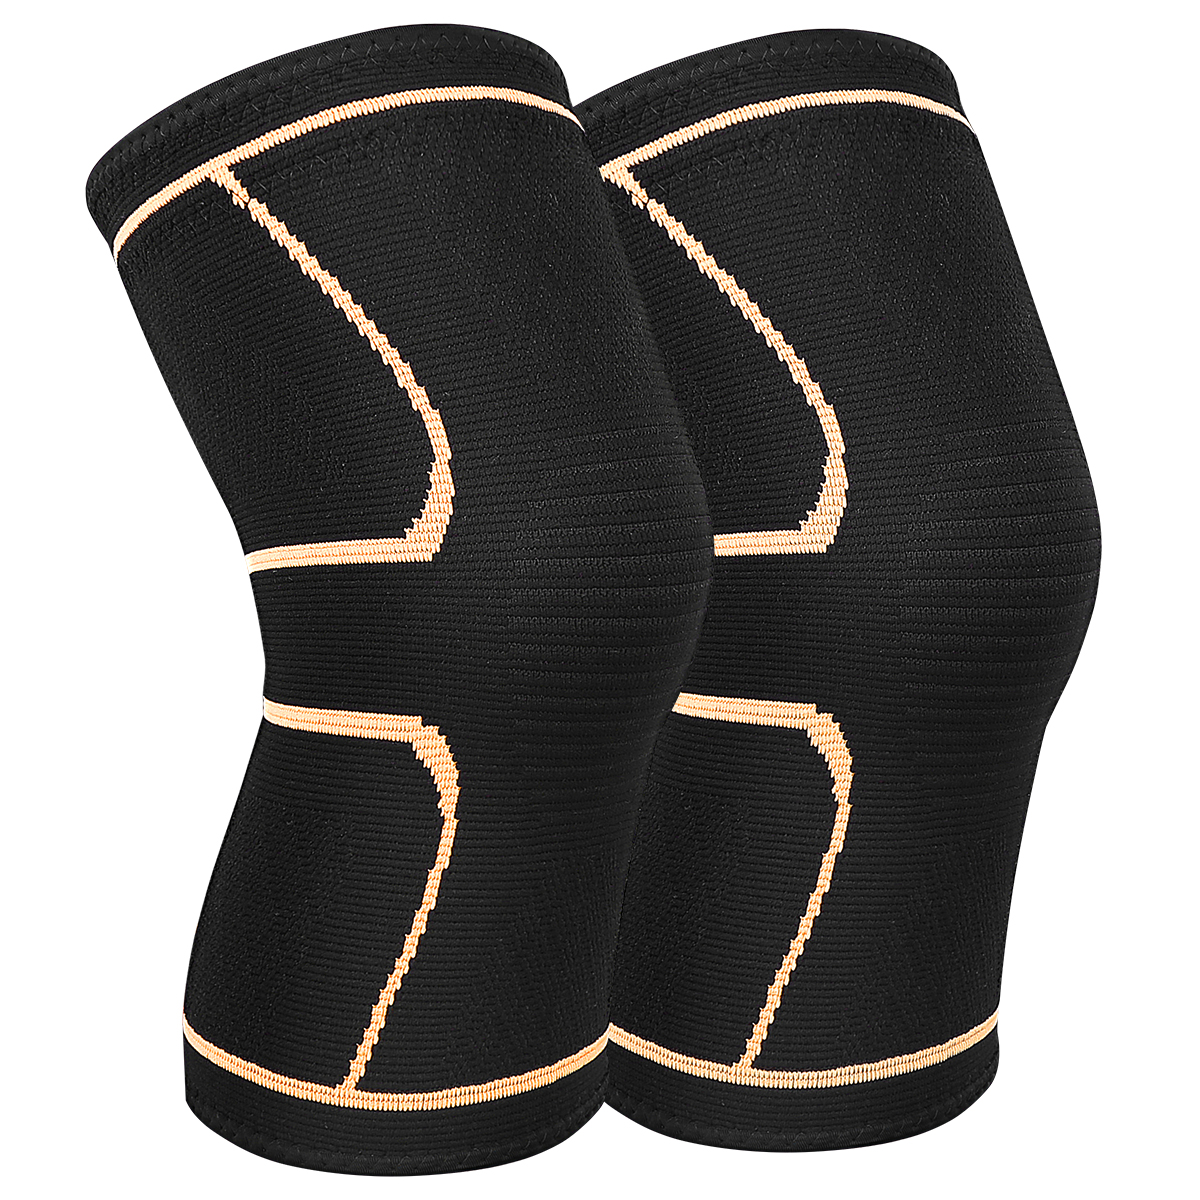 Knee Brace Support Pair for Men Women, AVIDDA Copper Compression Knee Sleeve for Joint Pain Relief, Arthritis, Meniscus Tear, Injury Recovery, Running, Squats, Weight Lifting, Football Gold L